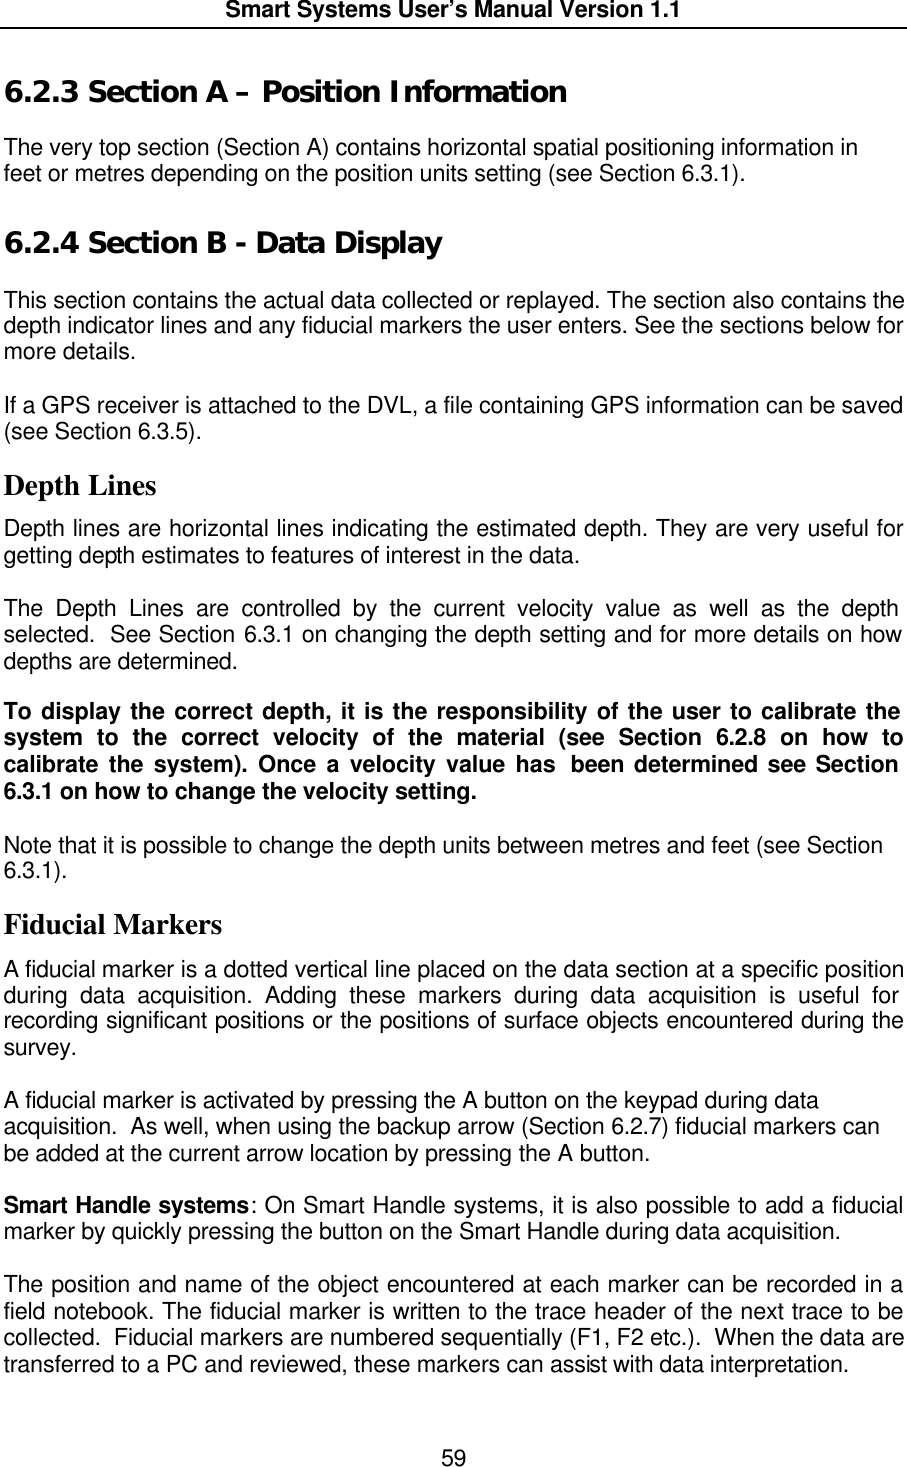  Smart Systems User’s Manual Version 1.1  59  6.2.3  Section A – Position Information  The very top section (Section A) contains horizontal spatial positioning information in feet or metres depending on the position units setting (see Section 6.3.1).  6.2.4  Section B - Data Display  This section contains the actual data collected or replayed. The section also contains the depth indicator lines and any fiducial markers the user enters. See the sections below for more details.  If a GPS receiver is attached to the DVL, a file containing GPS information can be saved  (see Section 6.3.5).  Depth Lines Depth lines are horizontal lines indicating the estimated depth. They are very useful for getting depth estimates to features of interest in the data.  The Depth Lines are controlled by the current velocity value as well as the depth selected.  See Section 6.3.1 on changing the depth setting and for more details on how depths are determined.   To display the correct depth, it is the responsibility of the user to calibrate the system to the correct velocity of the material (see Section 6.2.8 on how to calibrate the system). Once a velocity value has  been determined see Section 6.3.1 on how to change the velocity setting.  Note that it is possible to change the depth units between metres and feet (see Section 6.3.1). Fiducial Markers A fiducial marker is a dotted vertical line placed on the data section at a specific position during data acquisition. Adding these markers during data acquisition is useful for recording significant positions or the positions of surface objects encountered during the survey.   A fiducial marker is activated by pressing the A button on the keypad during data acquisition.  As well, when using the backup arrow (Section 6.2.7) fiducial markers can be added at the current arrow location by pressing the A button.  Smart Handle systems: On Smart Handle systems, it is also possible to add a fiducial marker by quickly pressing the button on the Smart Handle during data acquisition.    The position and name of the object encountered at each marker can be recorded in a field notebook. The fiducial marker is written to the trace header of the next trace to be collected.  Fiducial markers are numbered sequentially (F1, F2 etc.).  When the data are transferred to a PC and reviewed, these markers can assist with data interpretation.   